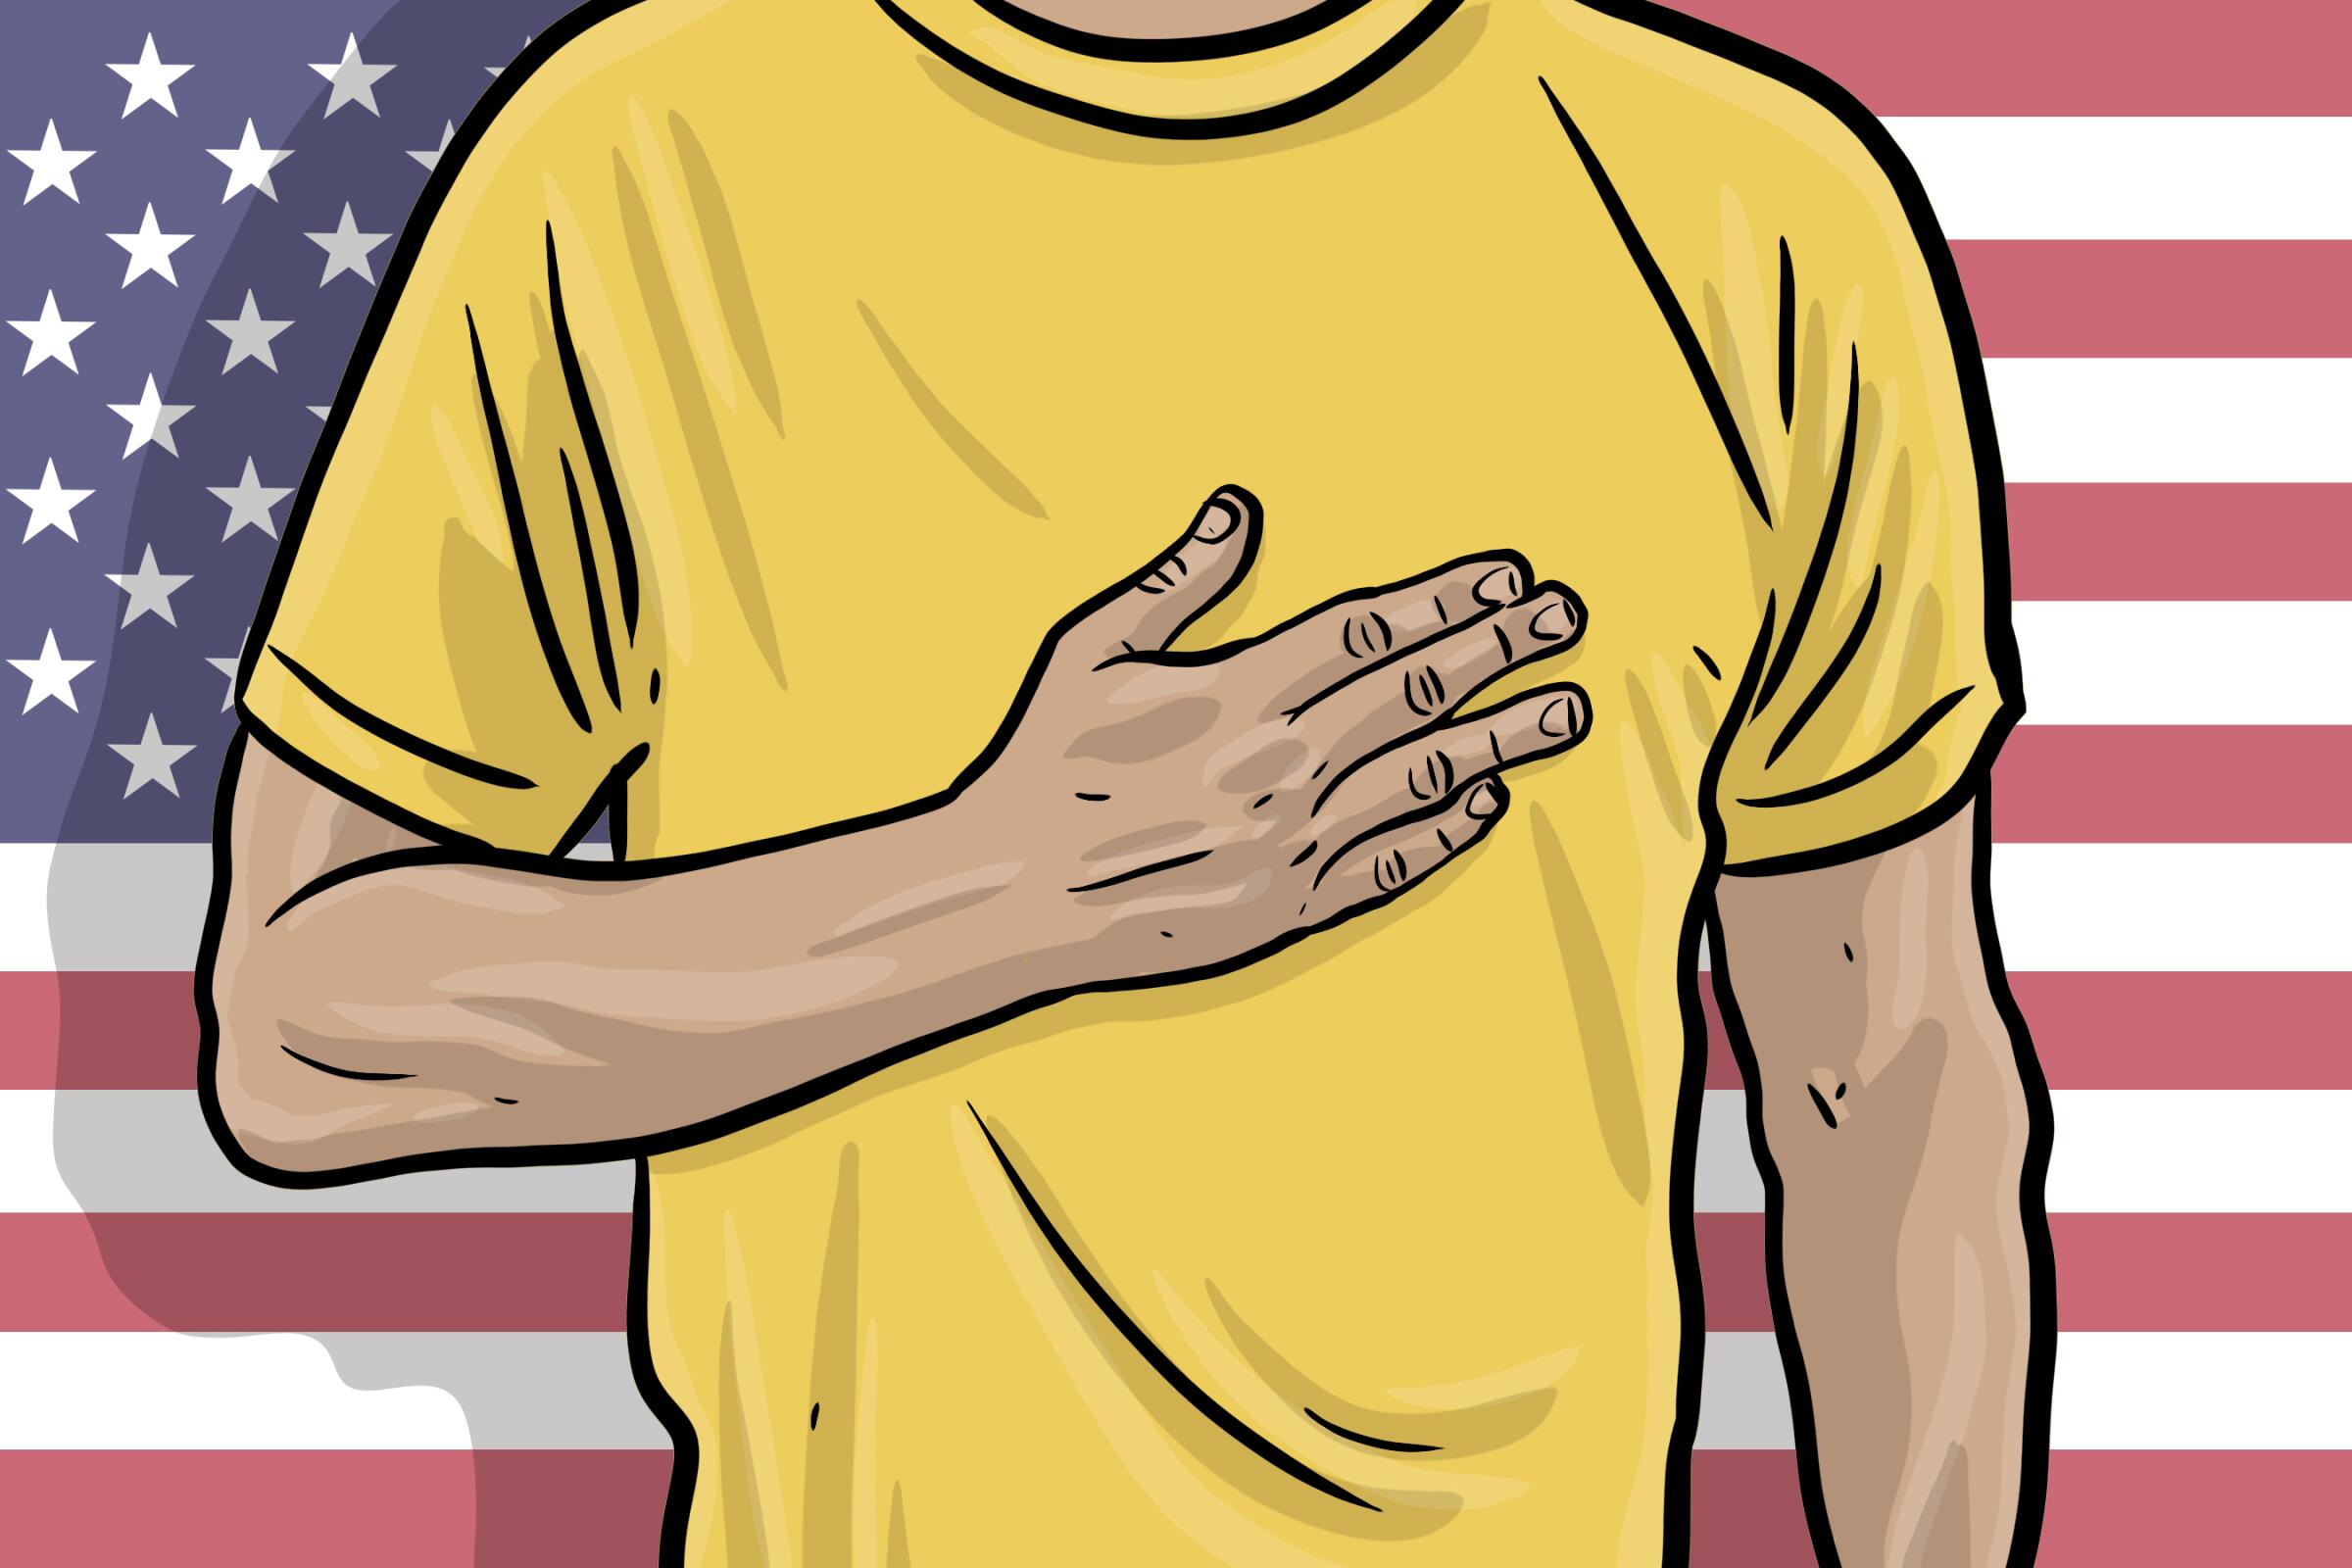 Illustrations in comic style of a person with hand over heart standing in front of a US flag.